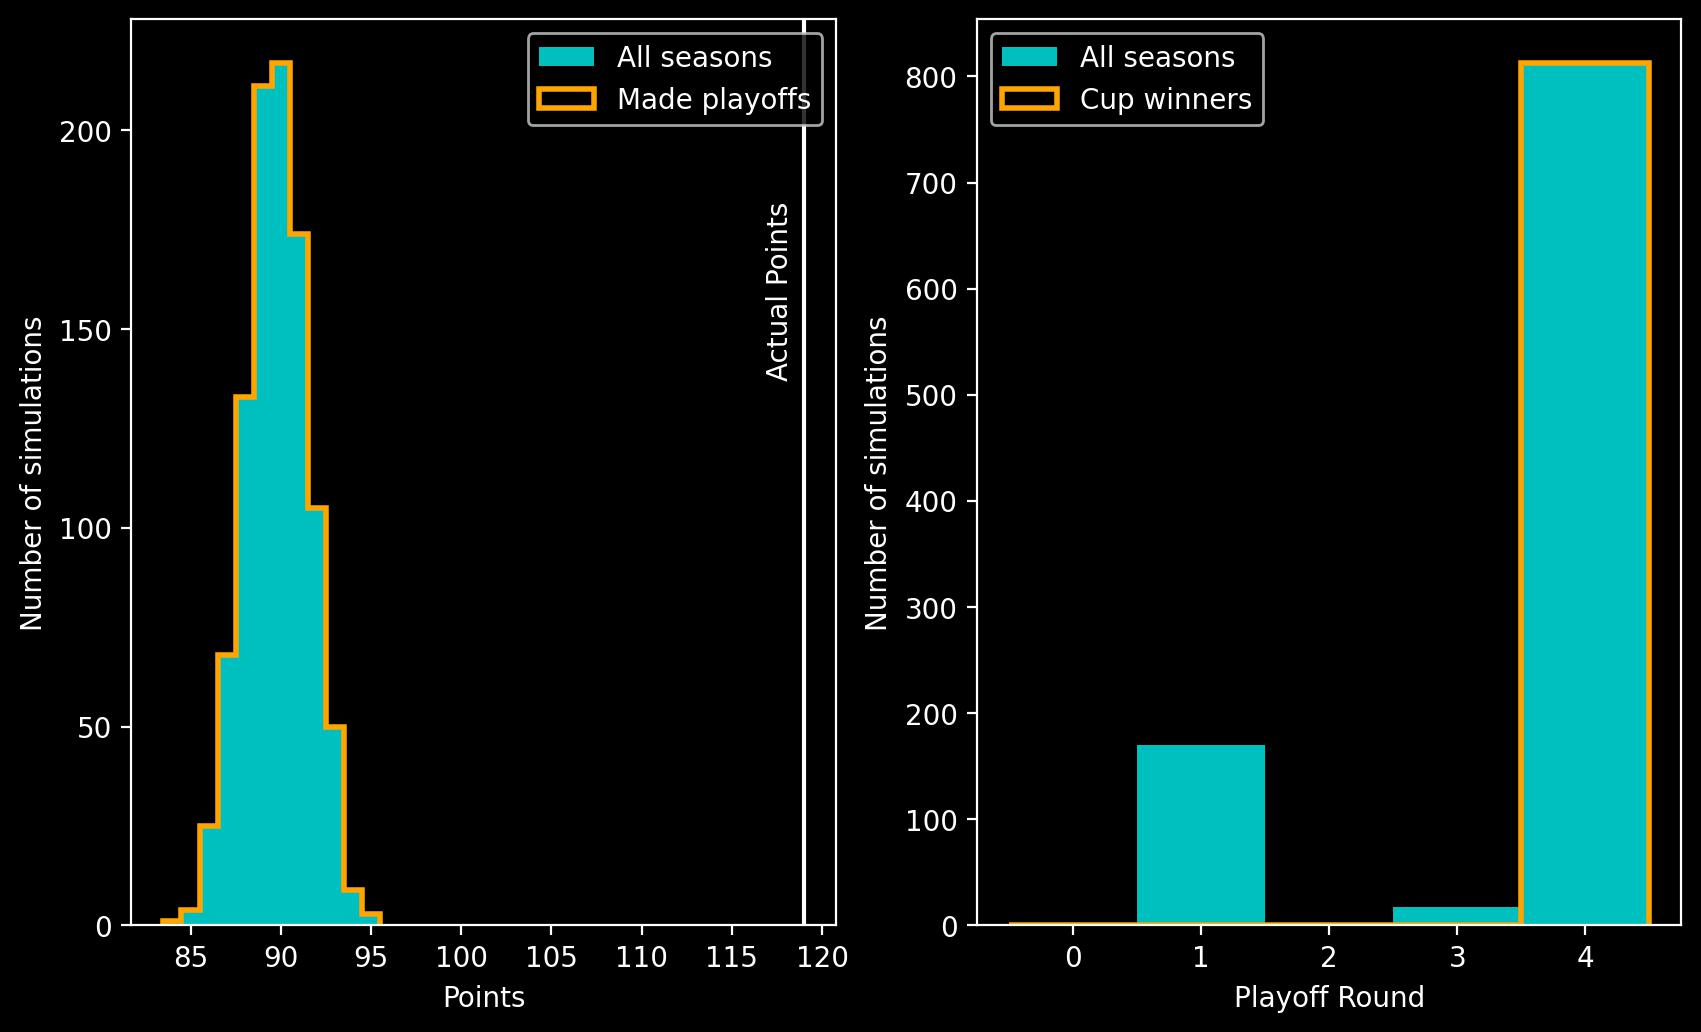 Two panel plot showing histograms. Left panel shows a histogram of points on the x-axis against number of simulations on the y-axis, the peak is at 90 points. Right panel shows playoff round on the x-axis against number of simulations on the y-axis. The largest bar is at playoff round 4.